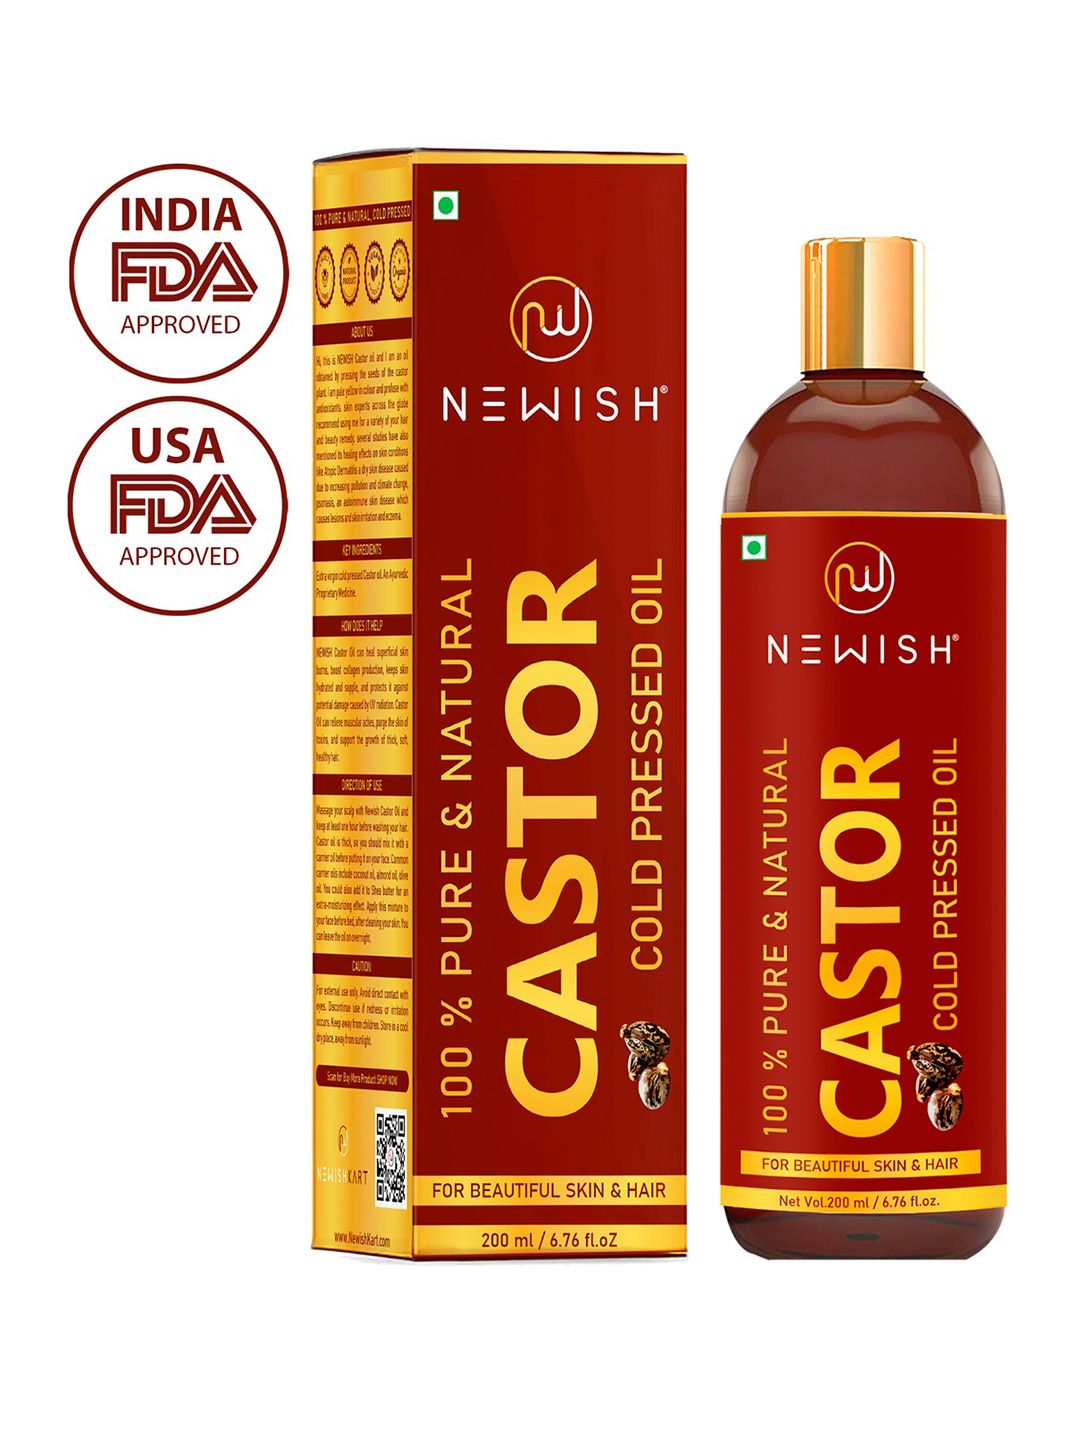 Newish Organic Cold Pressed Castor Oil for Hair Growth and Skin Care Eyebrow 200 ml Price in India